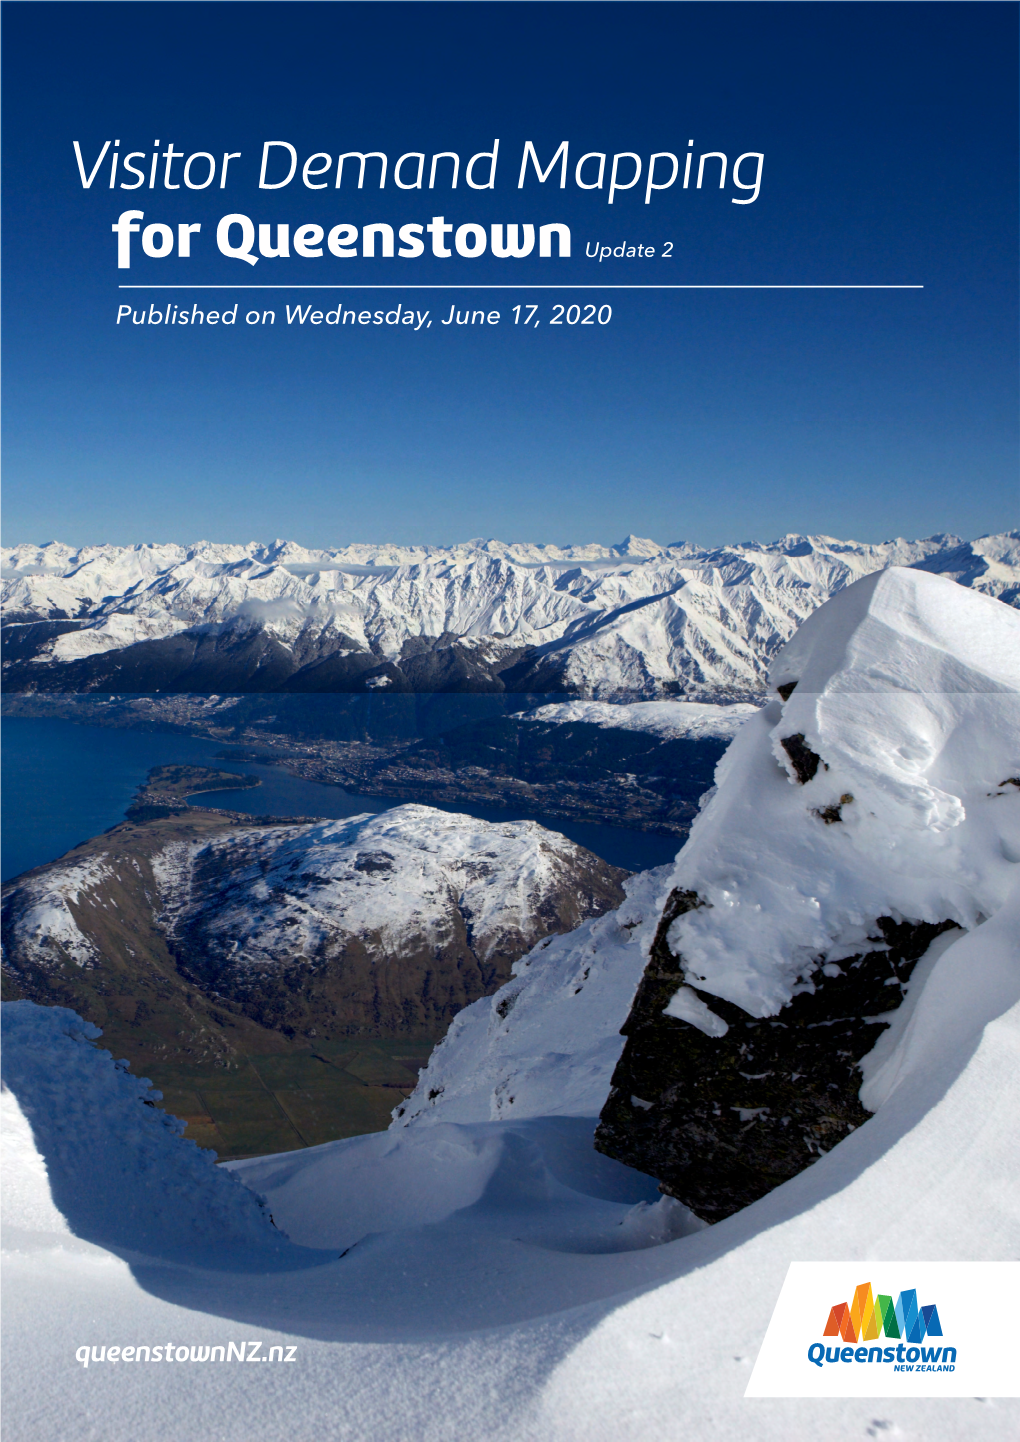 Visitor Demand Mapping Demand Visitor for Queenstown for Published on Wednesday, June 17, 2020 Update 2